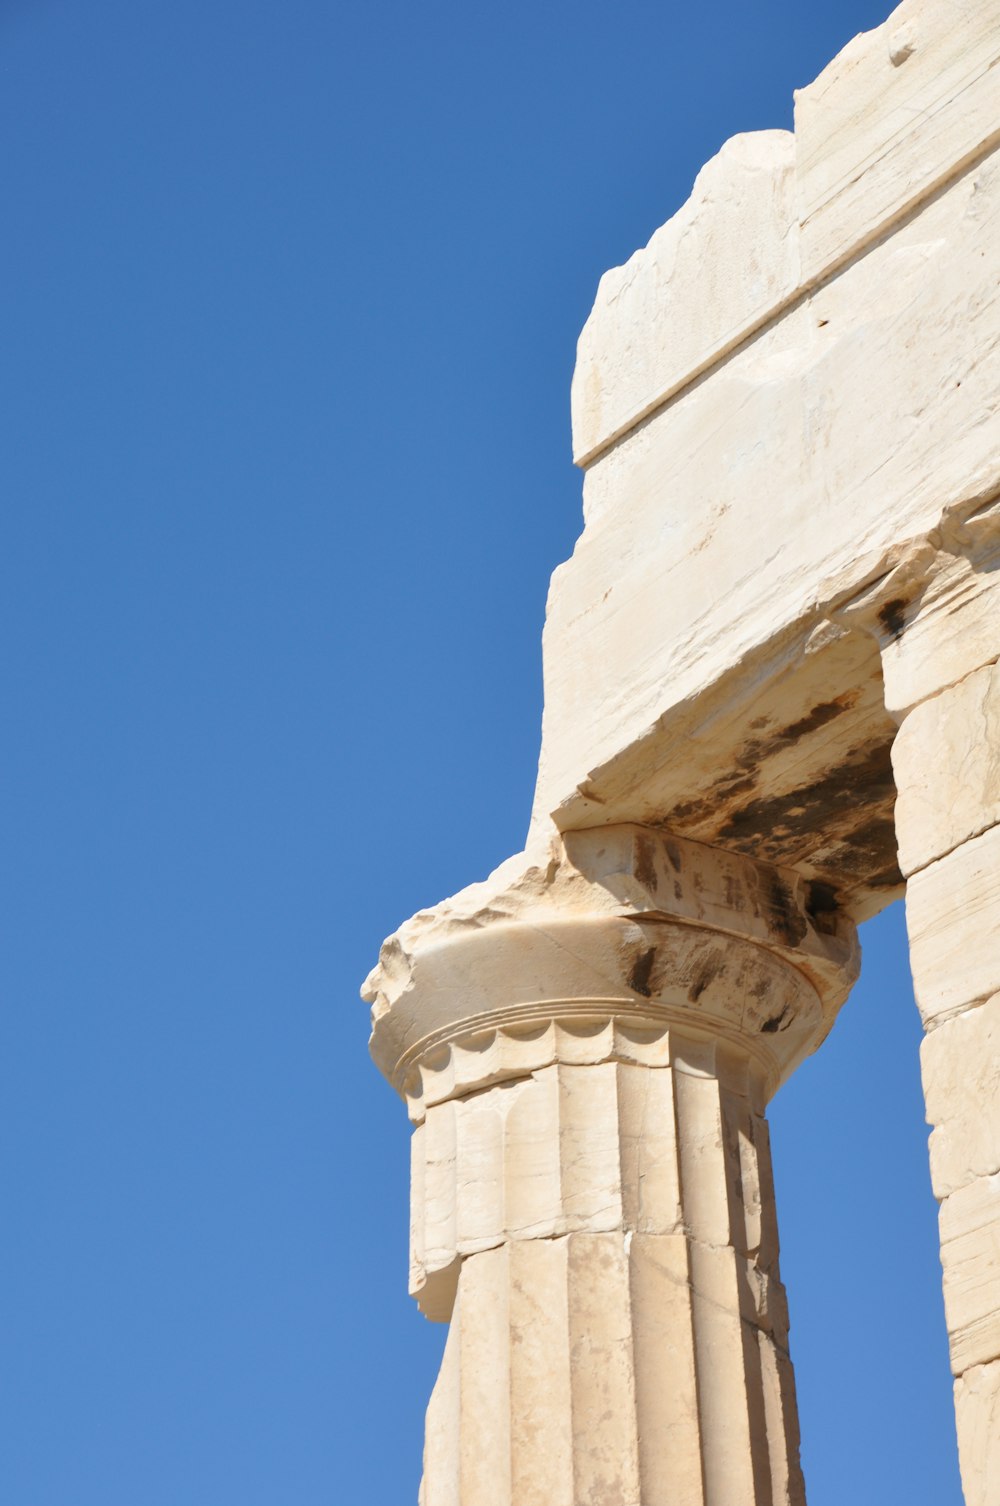 a close up of a column with a blue sky in the background